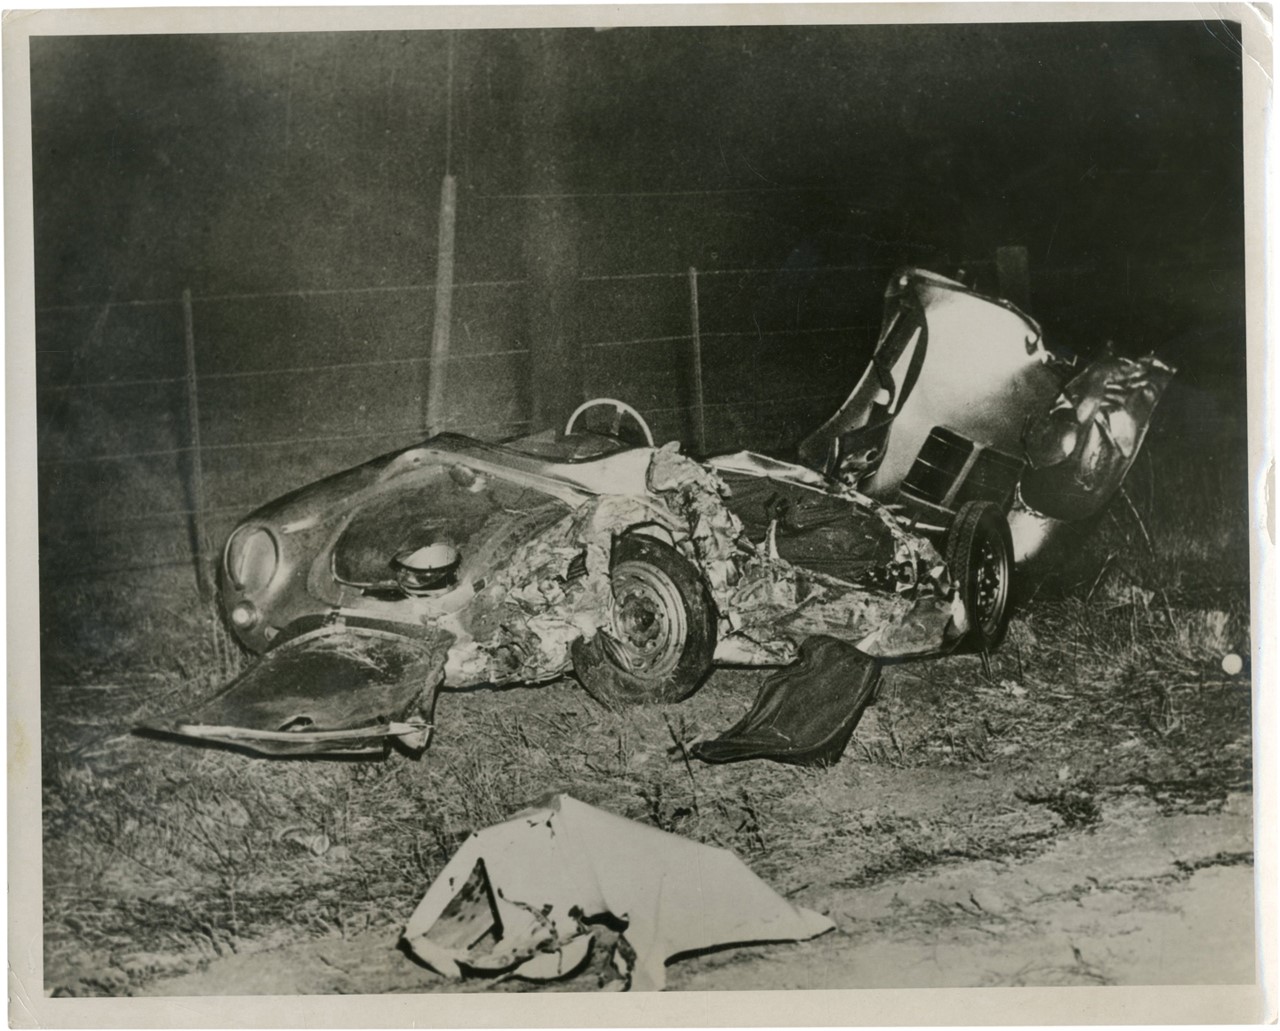 The Brown Brothers Collection - The Remains of James Dean's Porsche Photograph